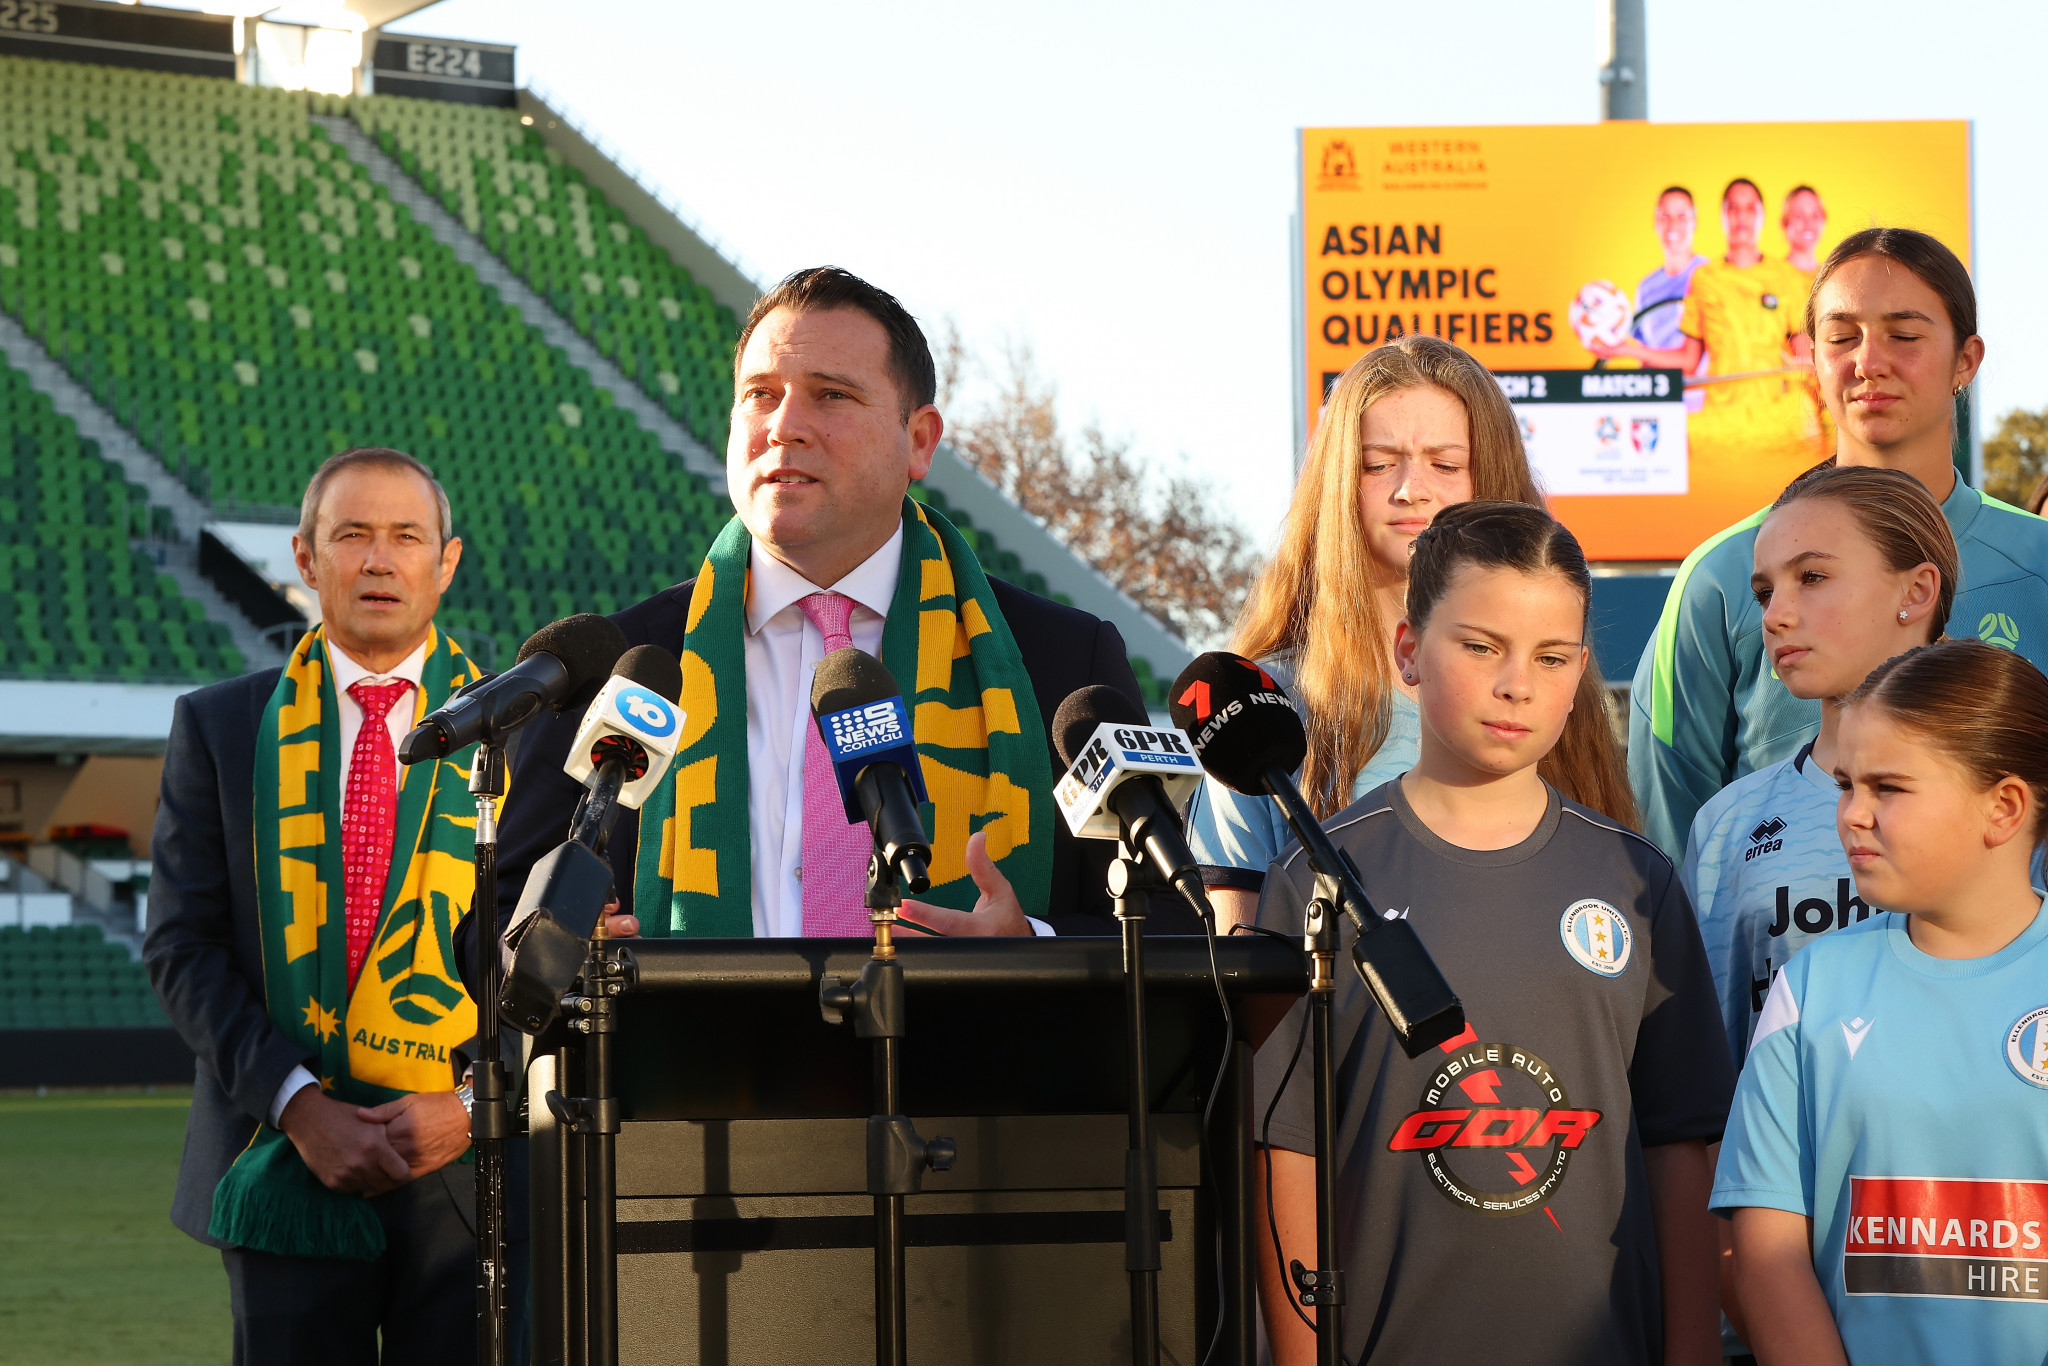 Football Australia chief executive James Johnson expressed his delight at Perth's hosting as it is also due to stage World Cup games later this year ©Getty Images